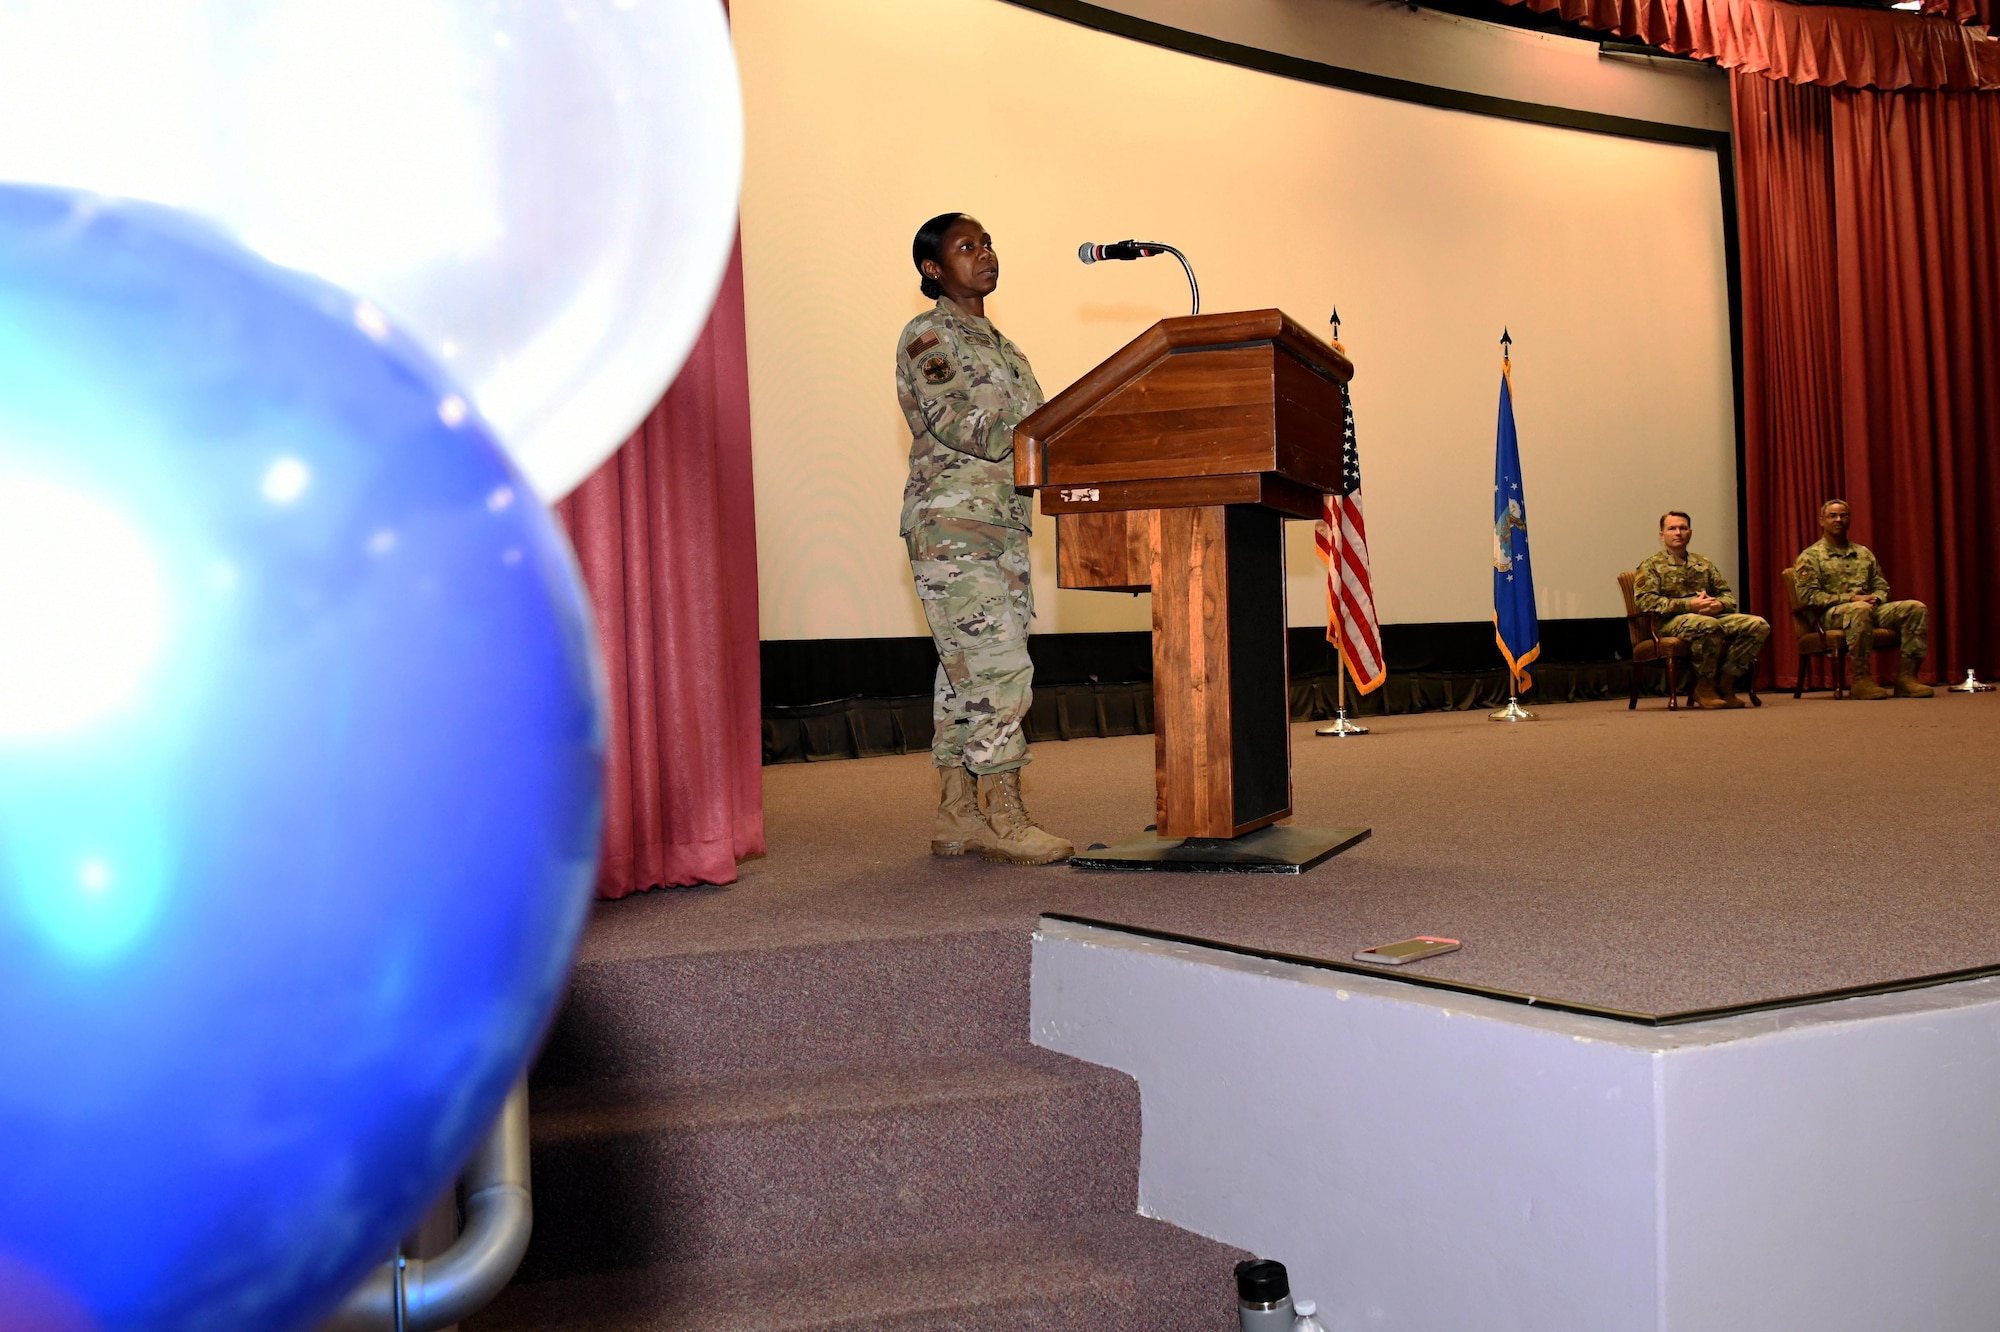 Photo shows Airman standing behind podium on a stage.